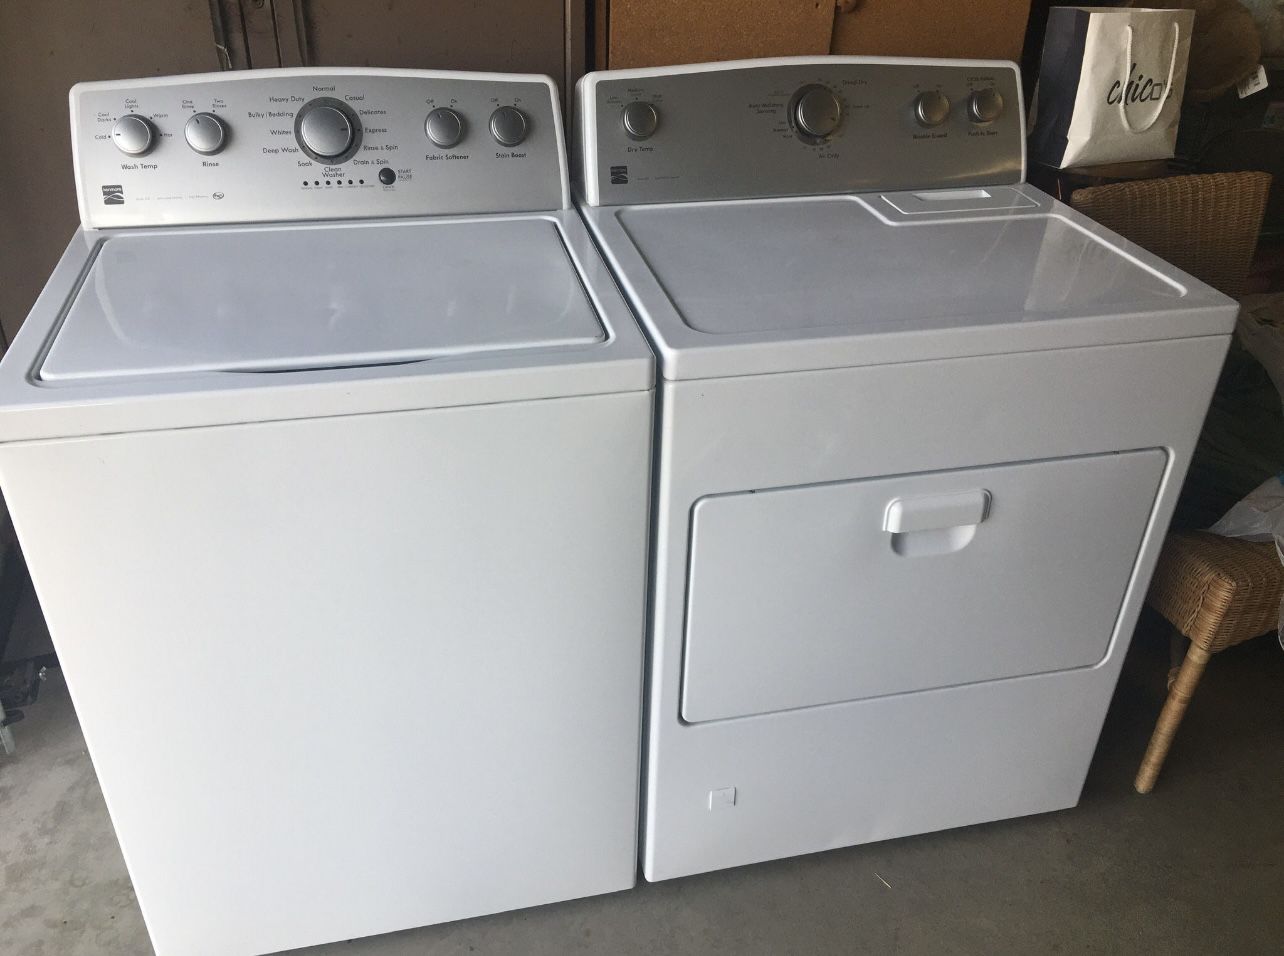 Kenmore 500 Series Washer And Dryer